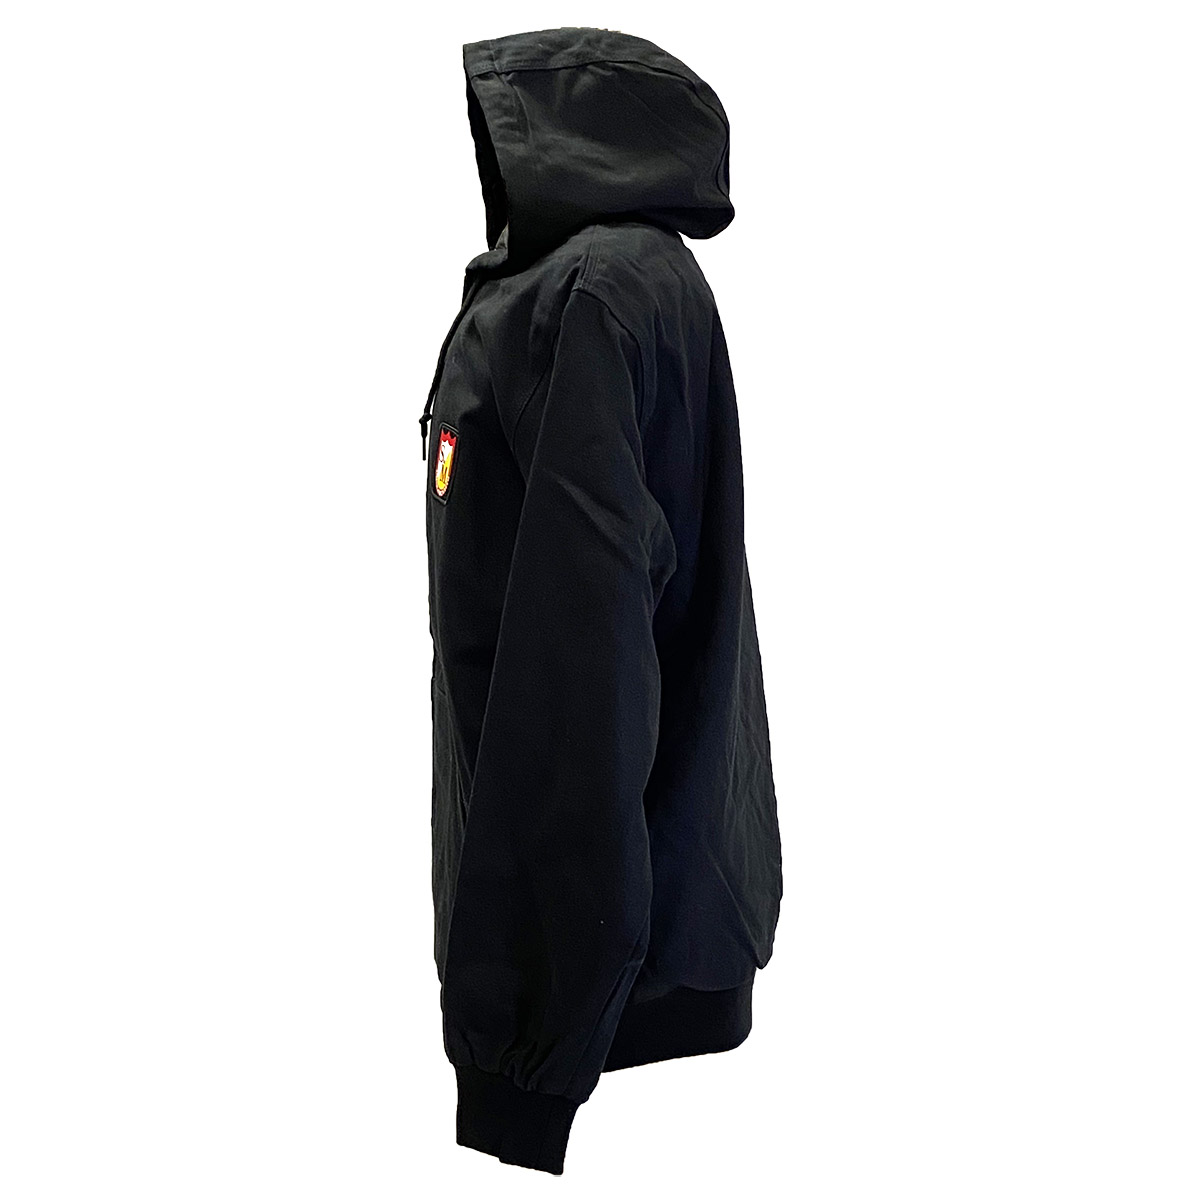 S&m Insulated Canvas Workwear Jacket - Black